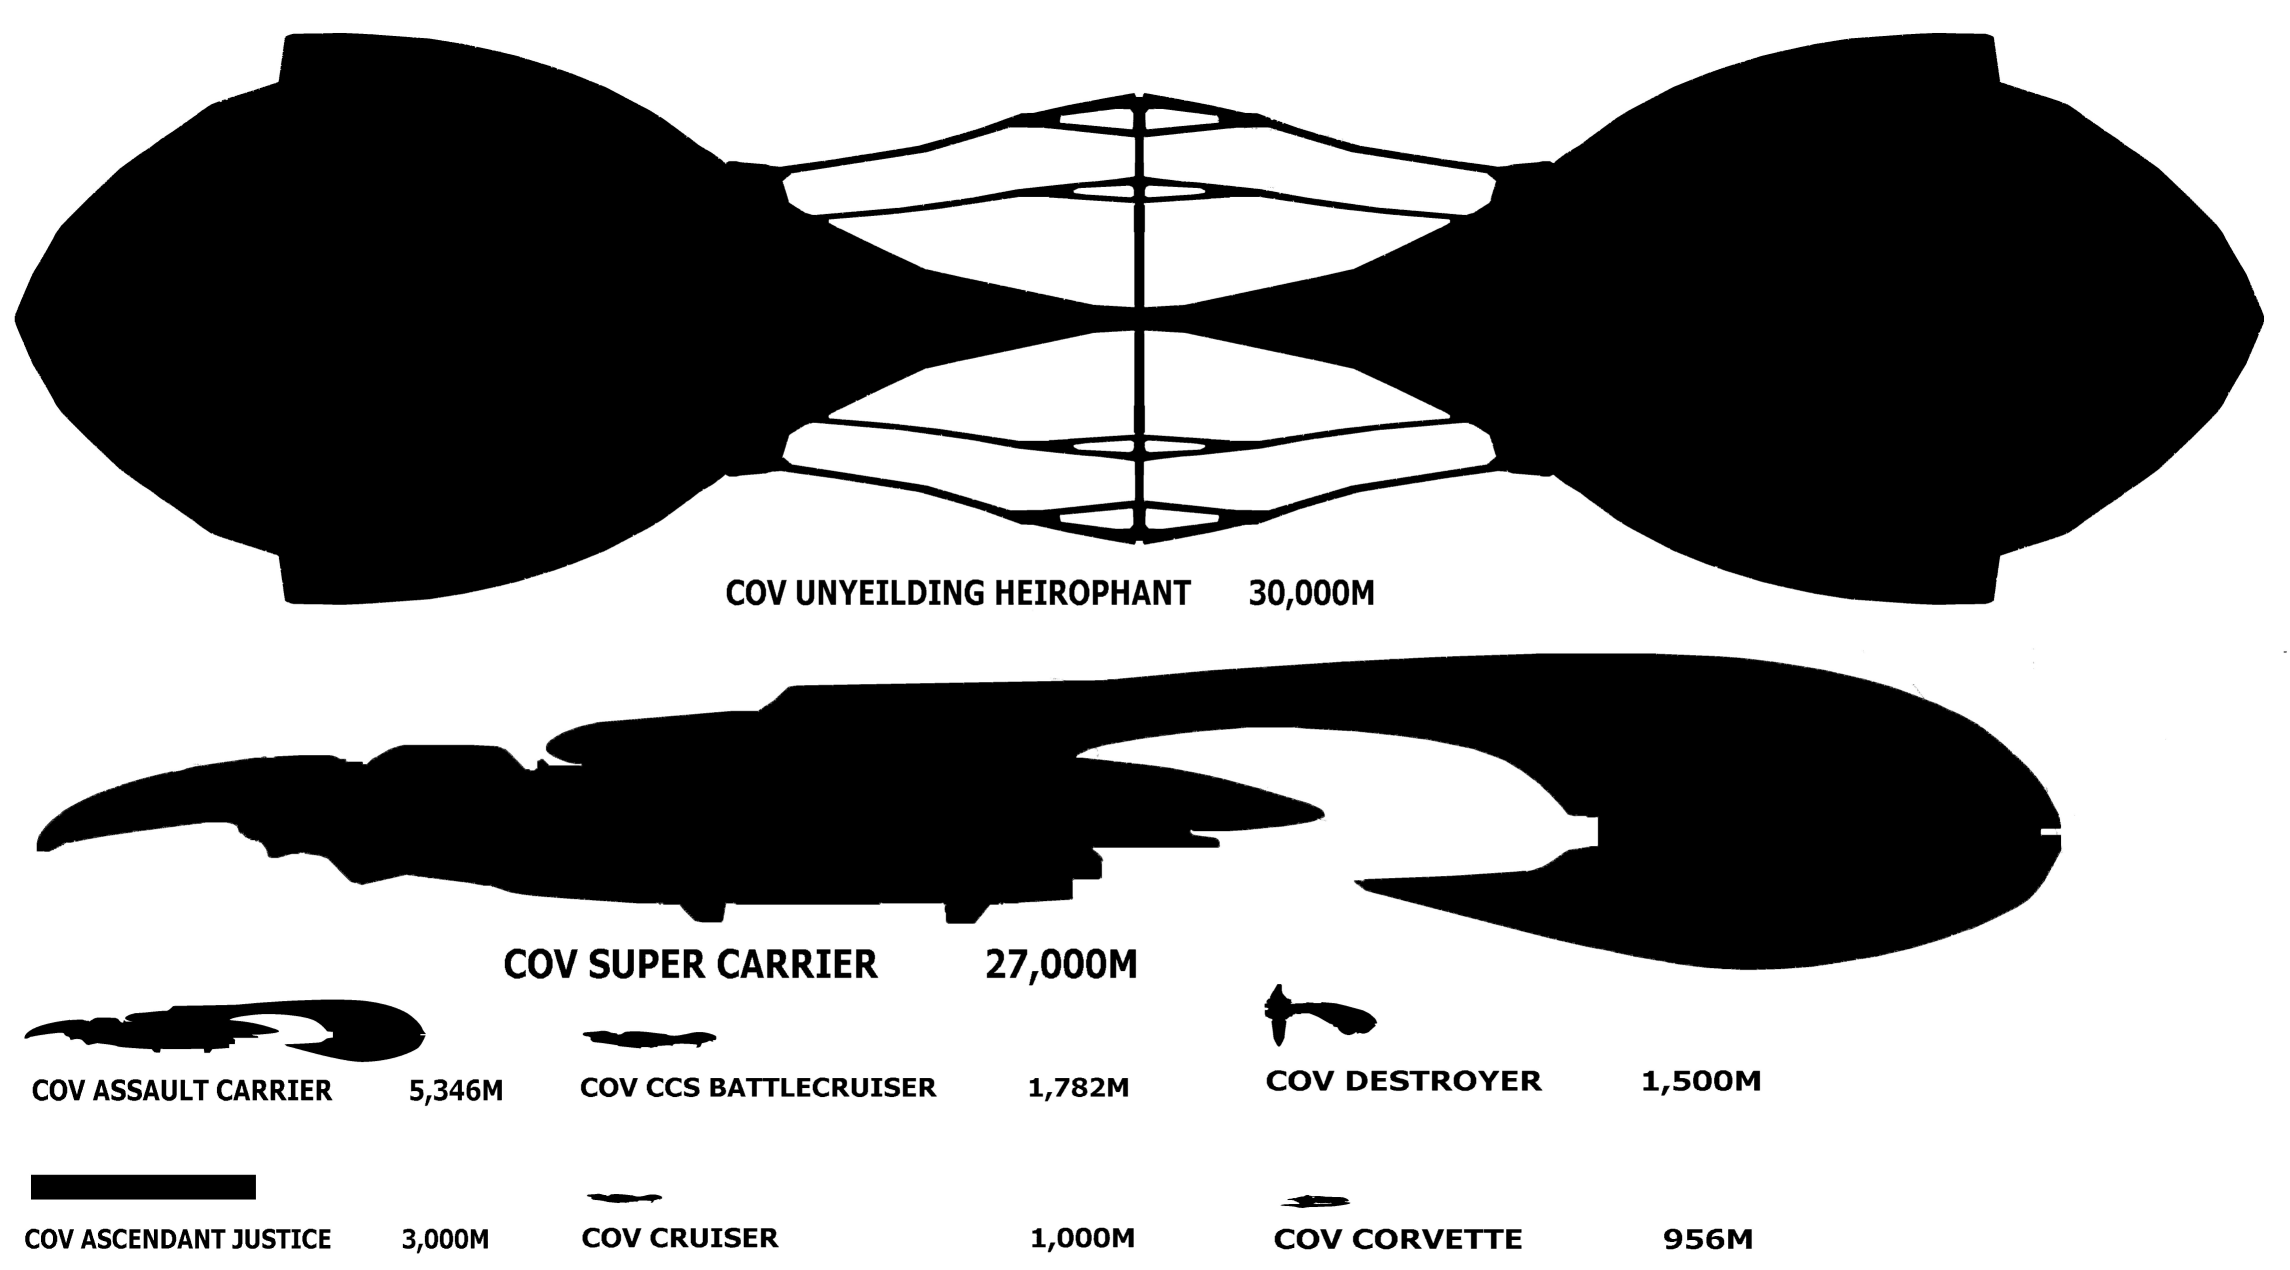 unsc infinity vs covenant supercarrier